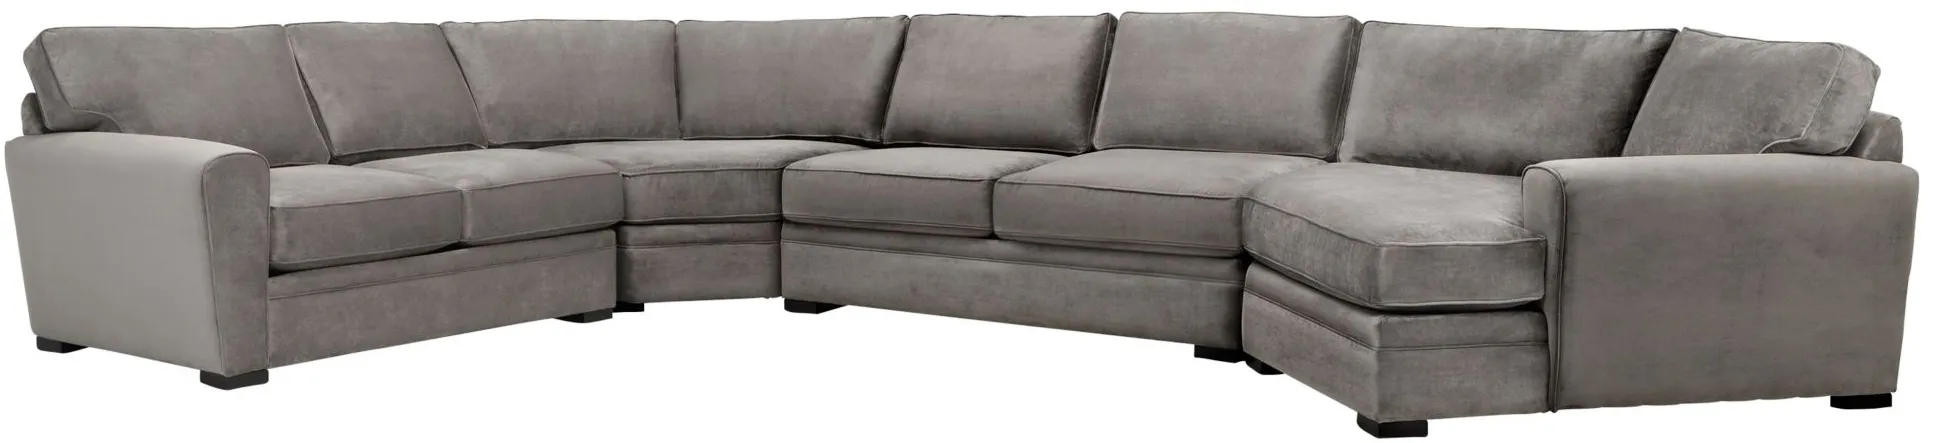 Artemis II 4-pc. Right Arm Facing Sectional Sofa in Vintage by Jonathan Louis